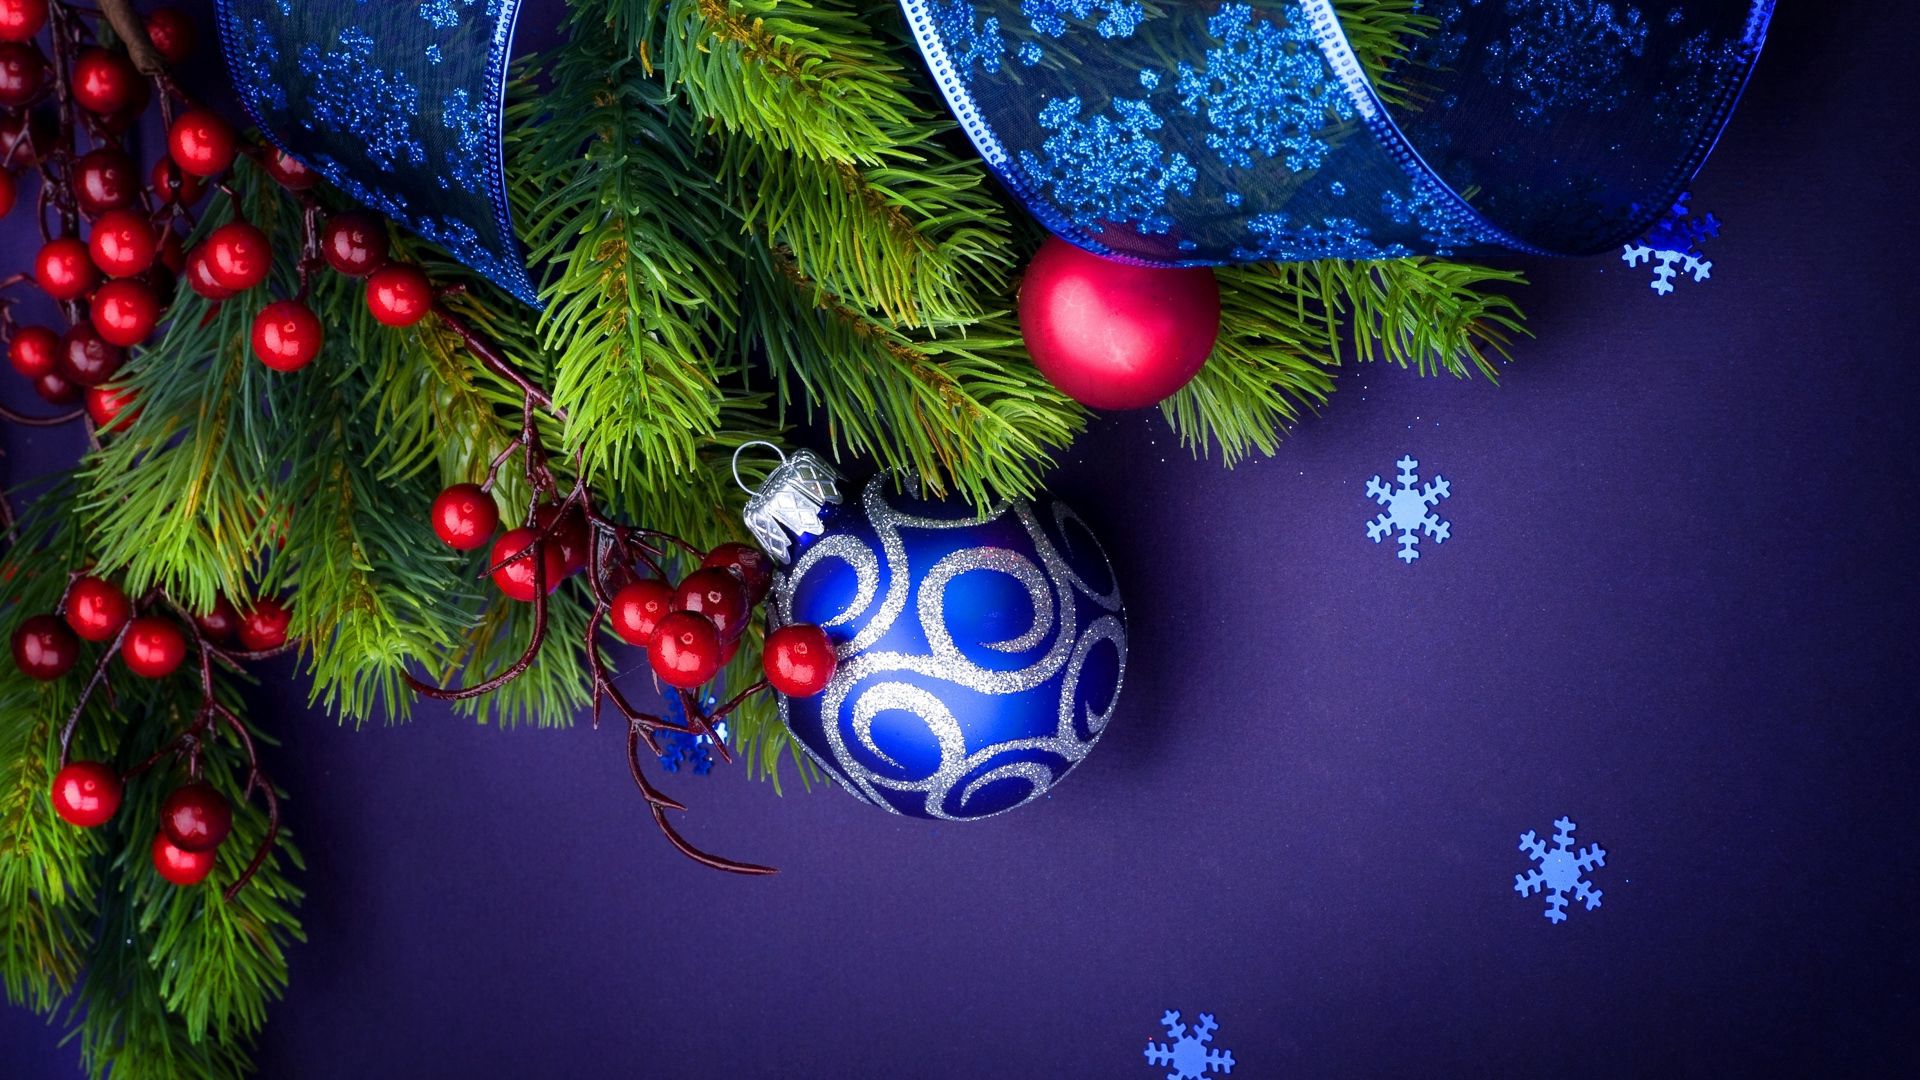 ball, holidays, new year, decorations, spruce, fir wallpaper for mobile